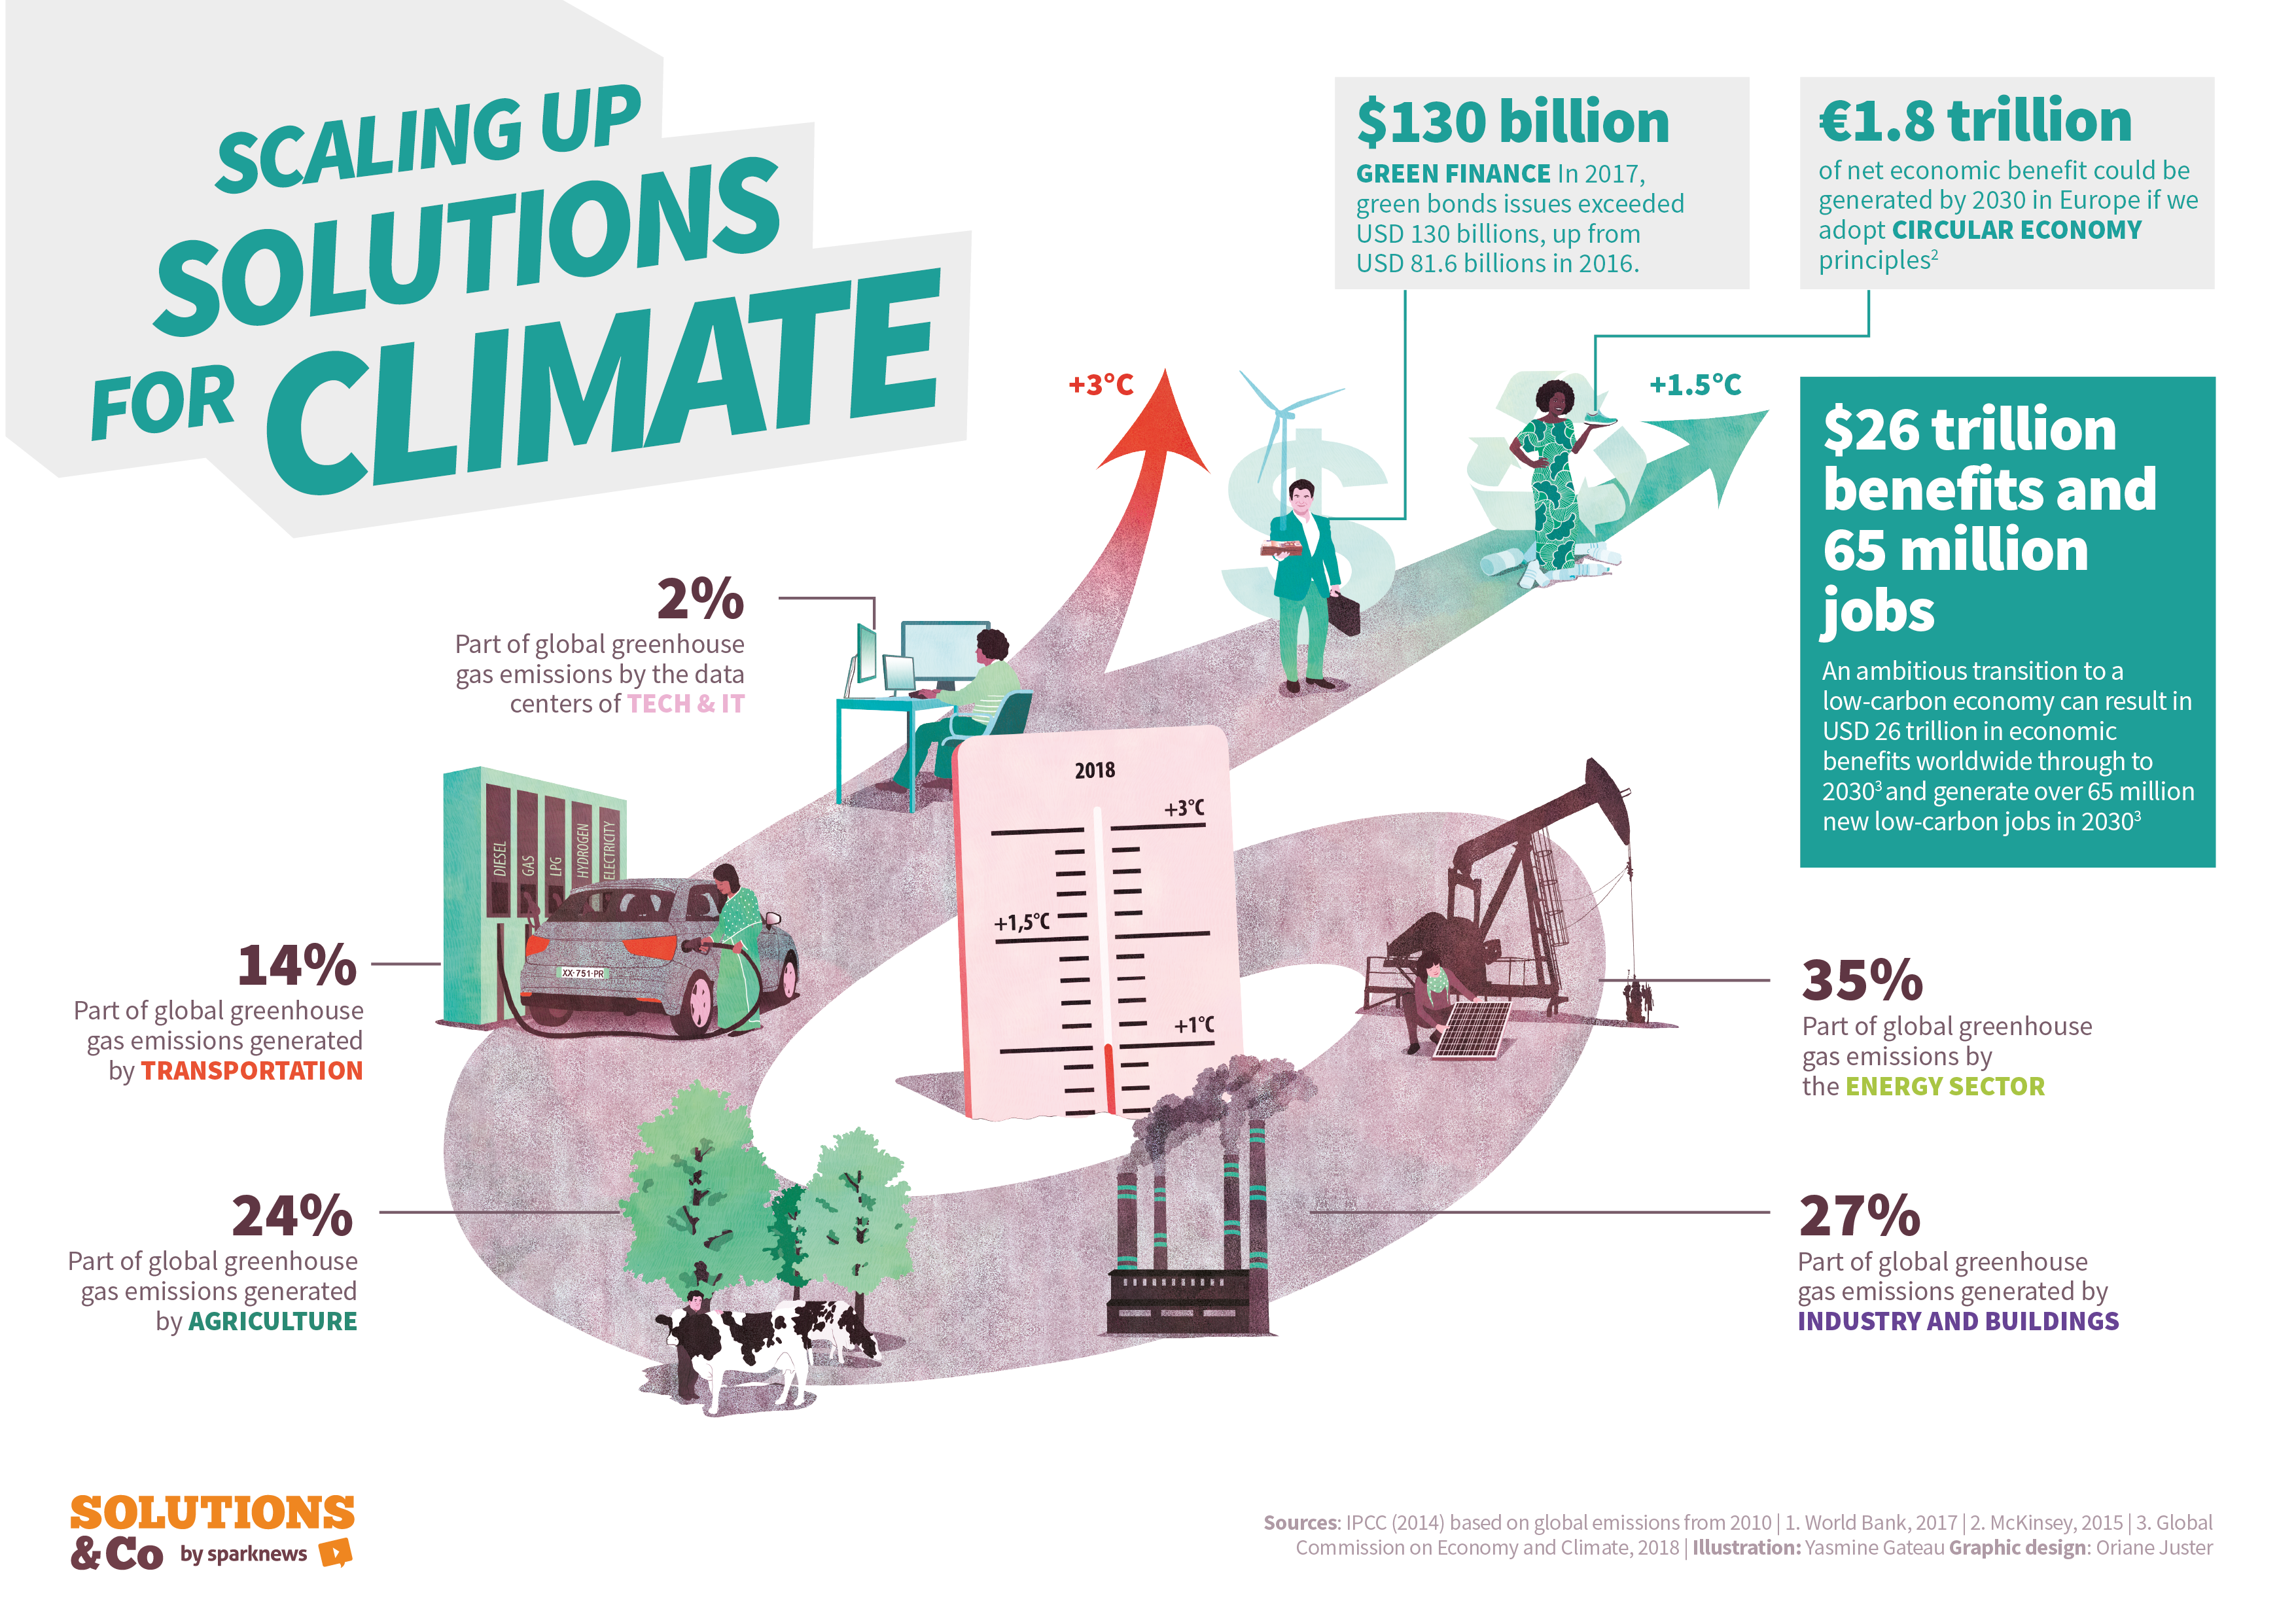 How can businesses scale up action to limit climate change?